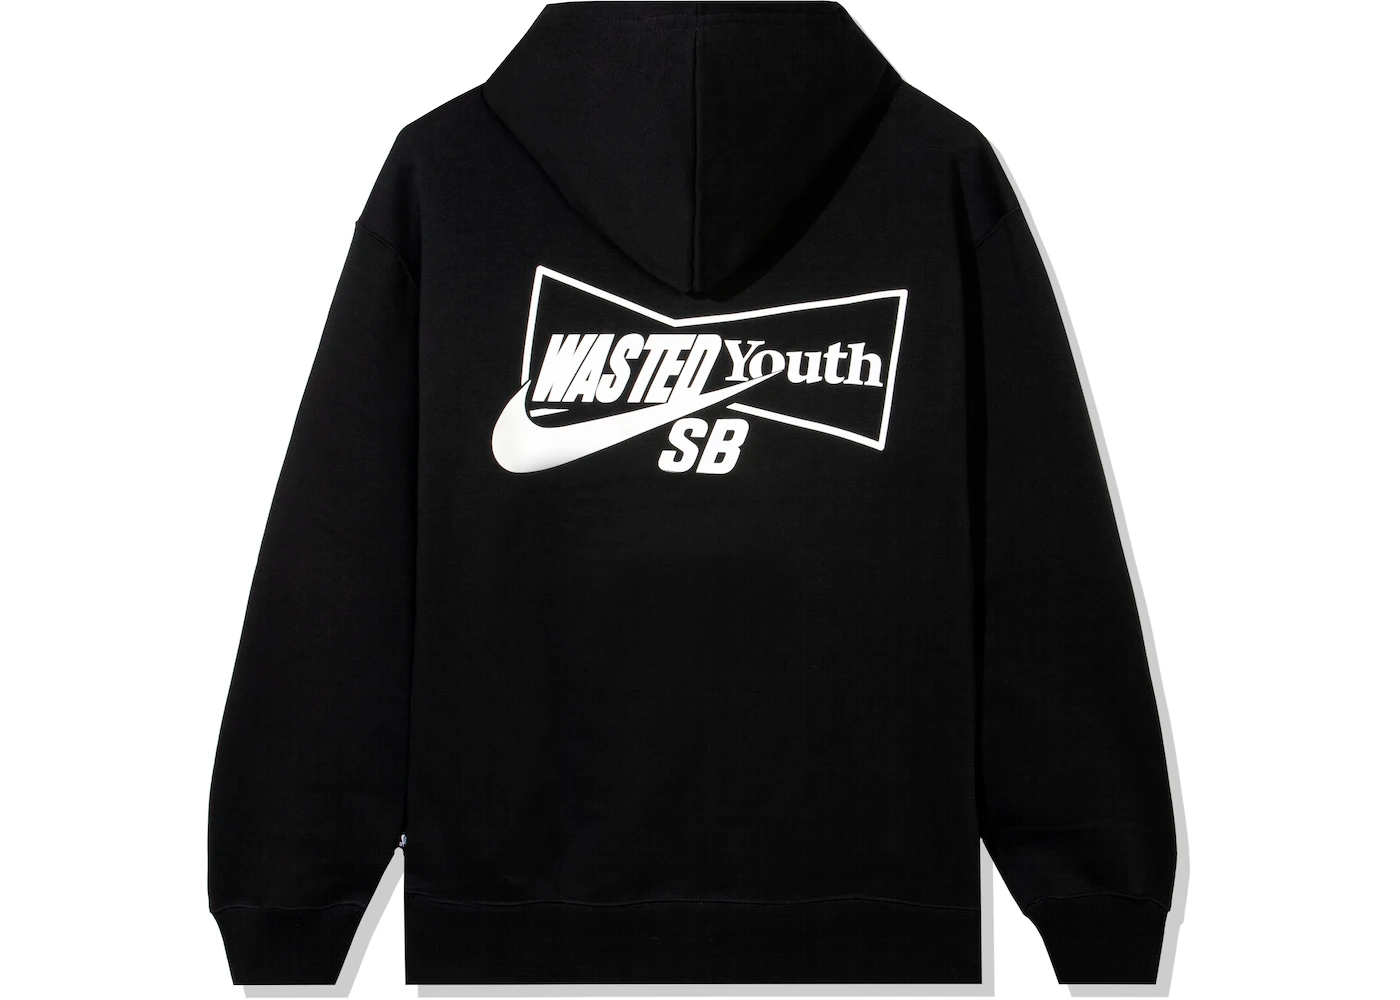 Wasted Youth HOODIE #2 Black XL | chaofightshop.com